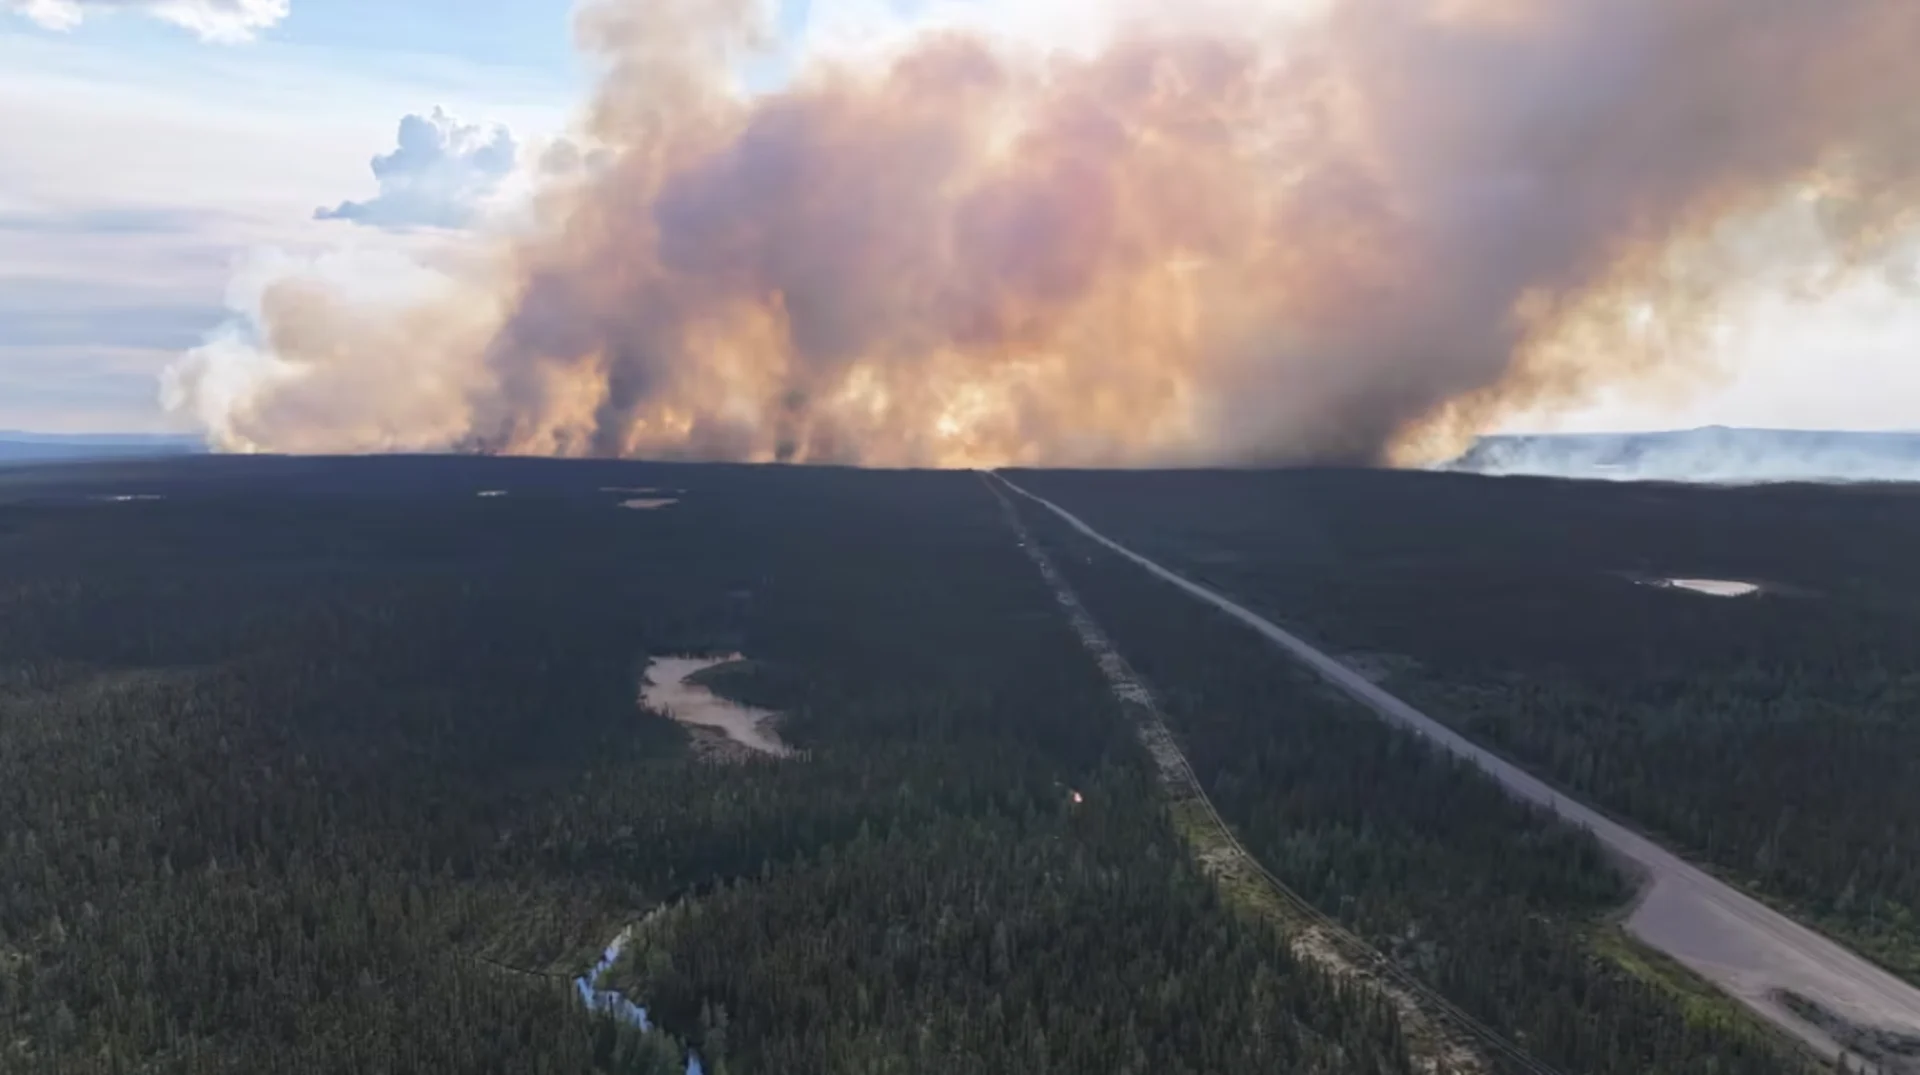 Lightning sparks new fires in Labrador, raising total to 7